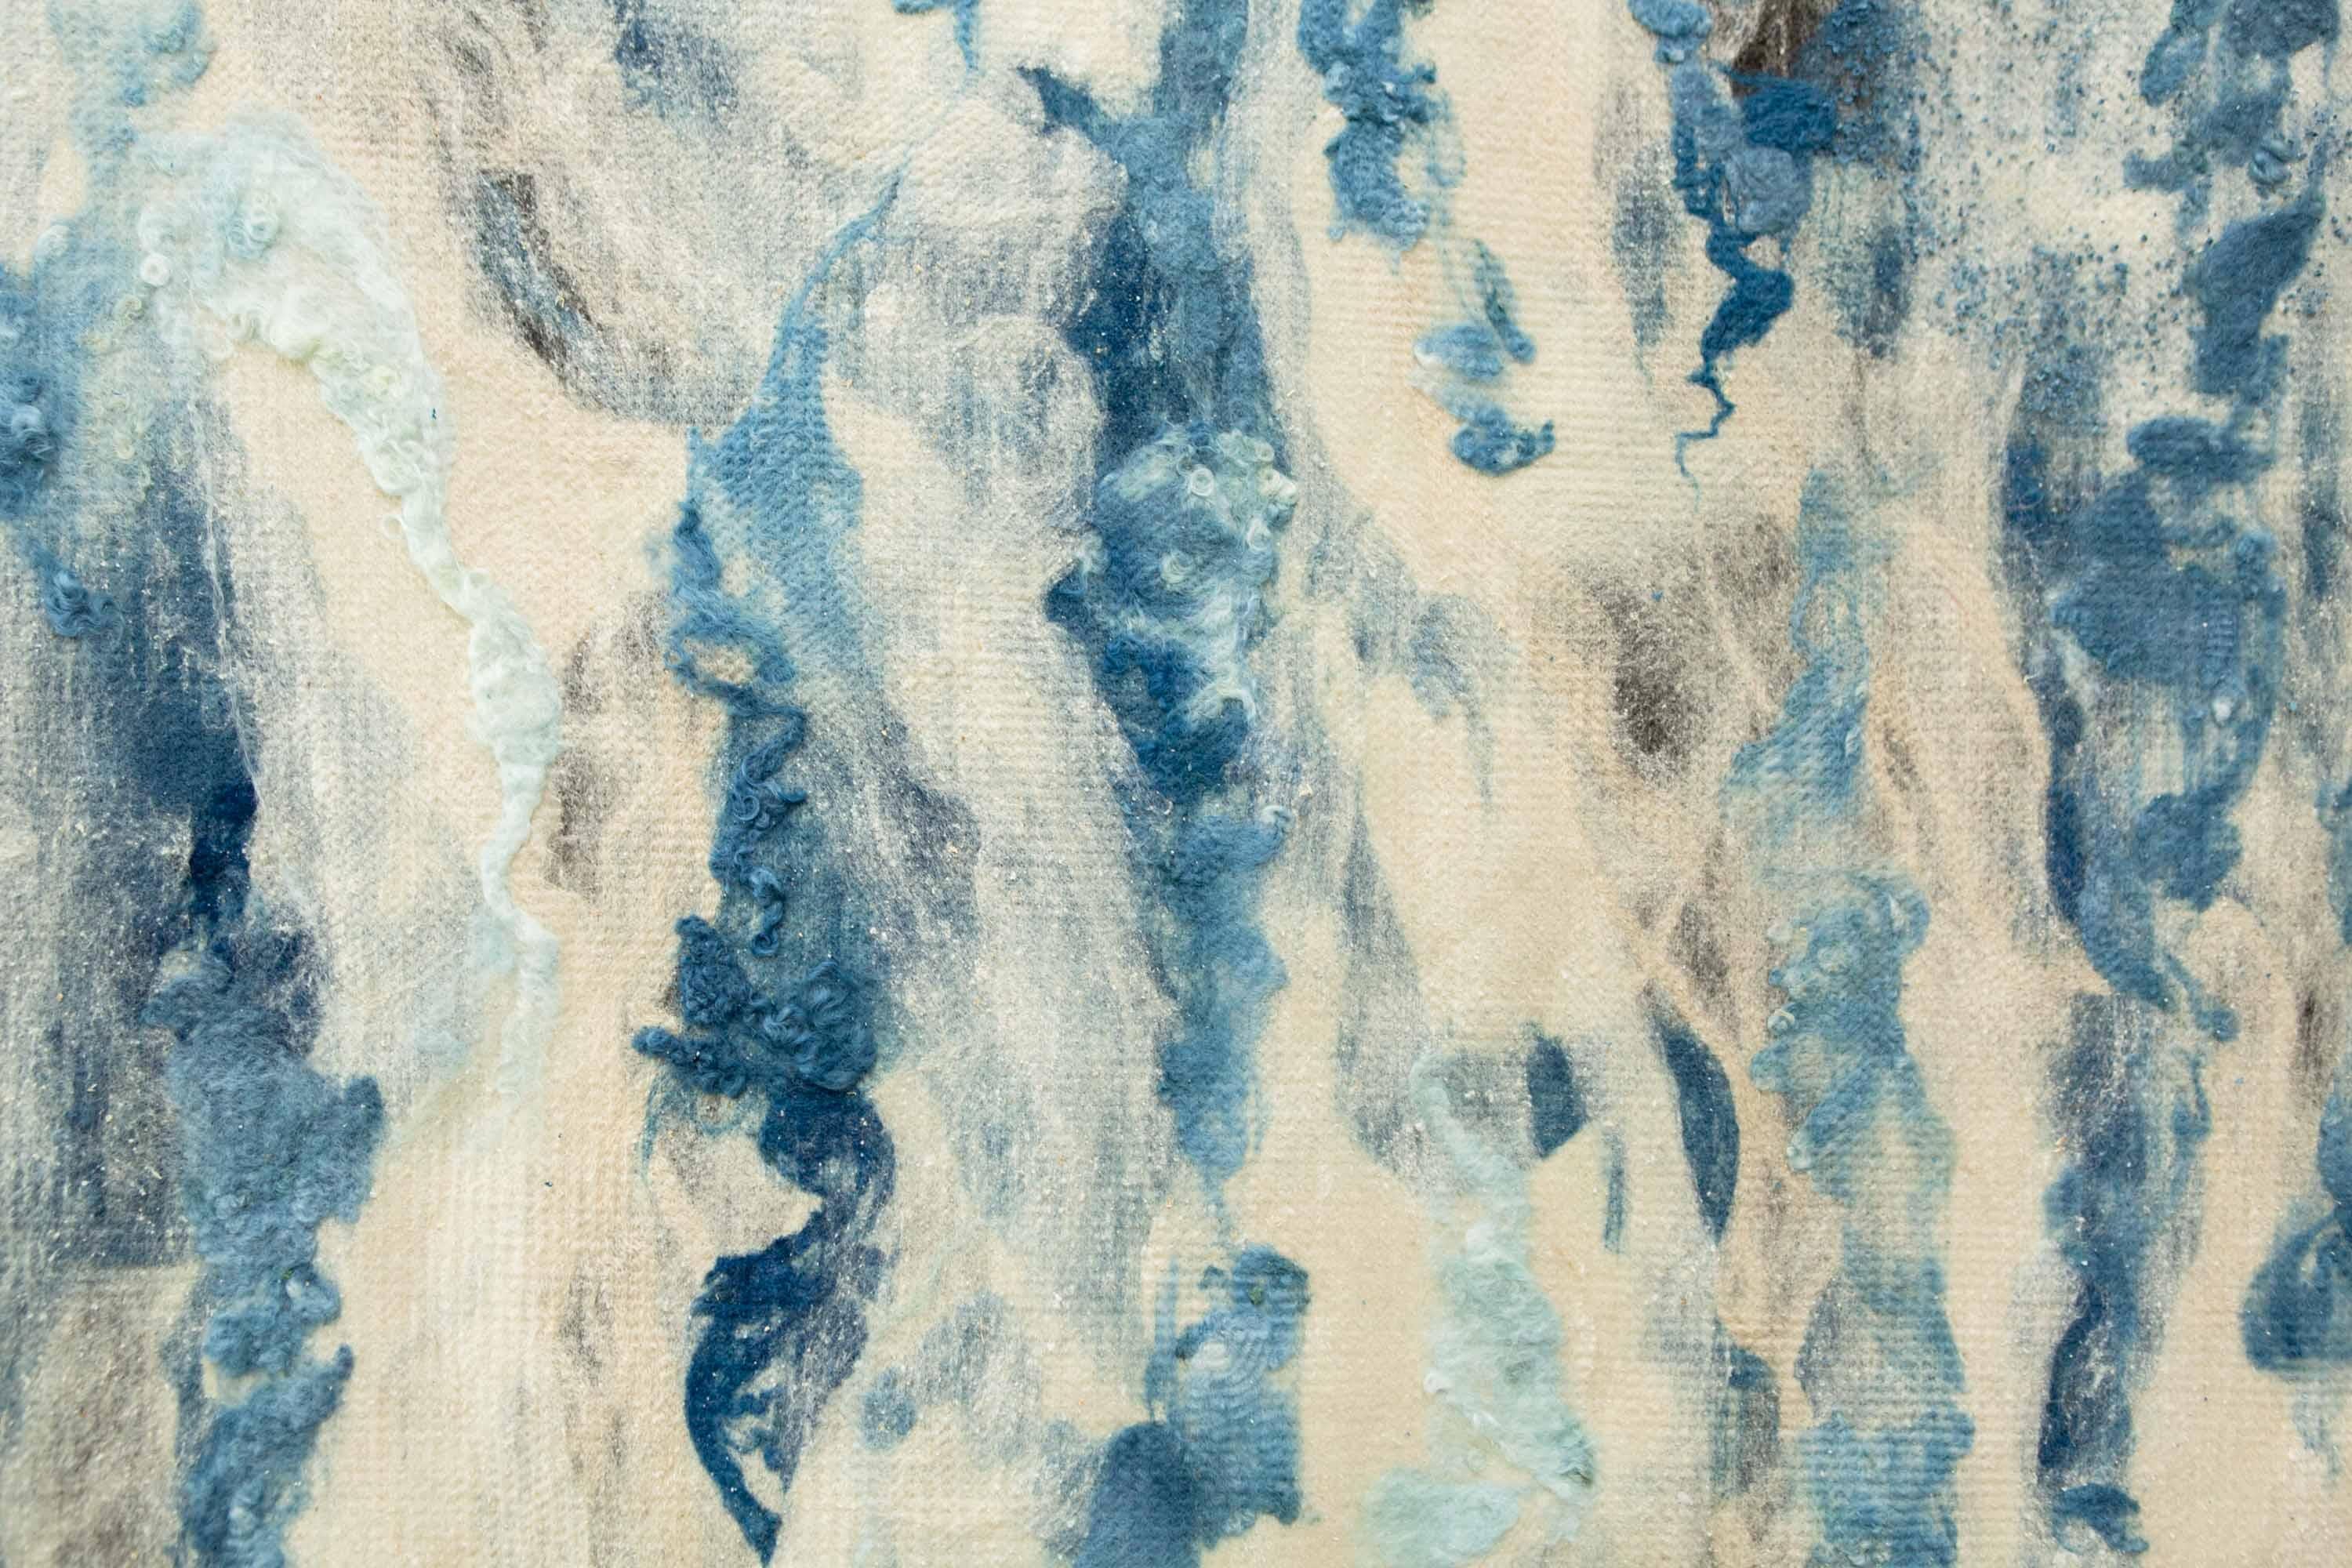 Contemporary Felted Wool Wall Art by JG Switzer, Indigo Raw Dyed Wool with Seaweed & Silk